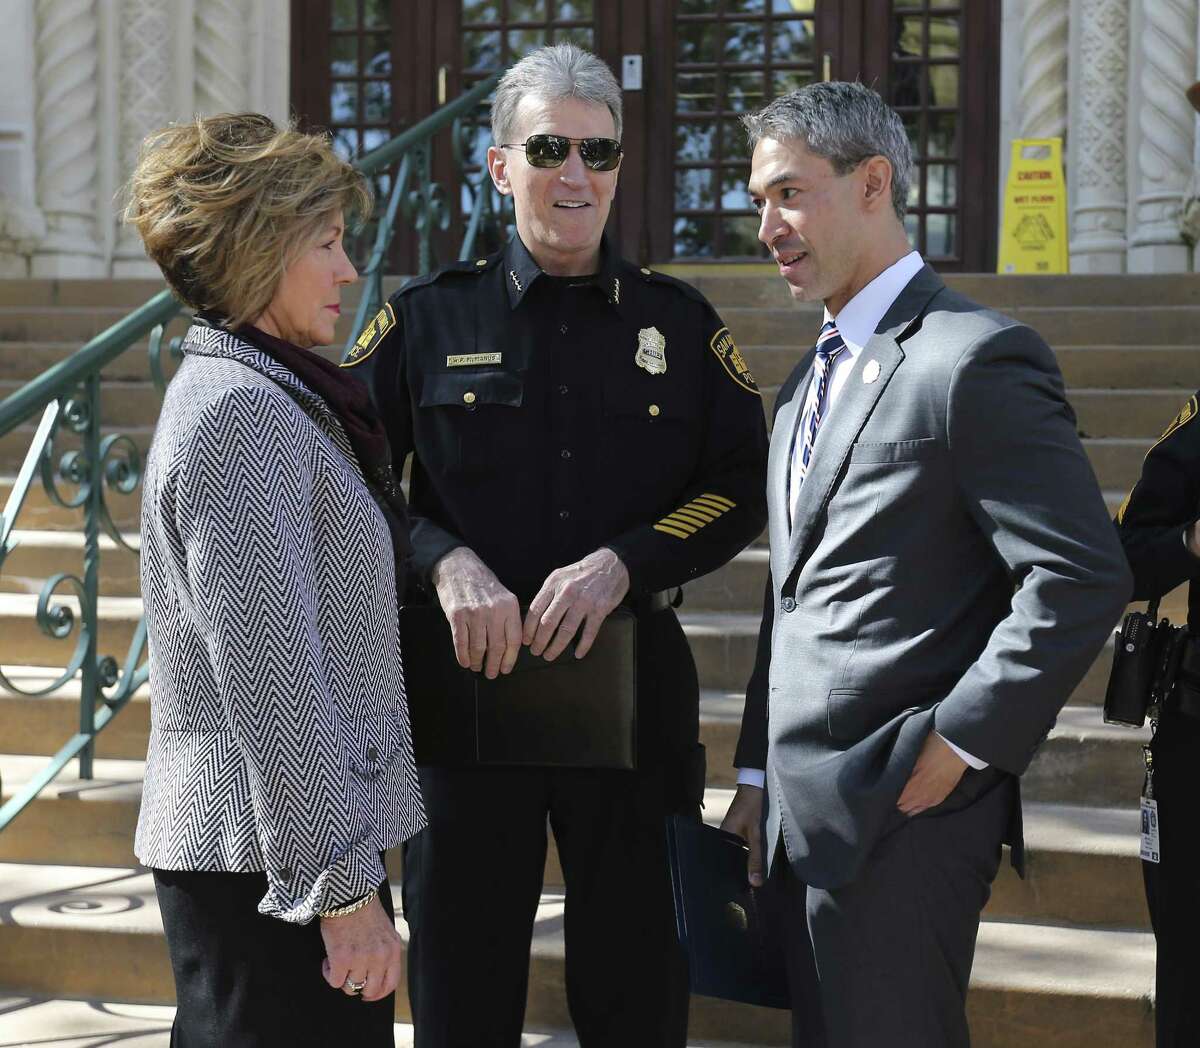 City Manager Sheryl Sculley (left) and Mayor Ron Nirenberg (right) meet with San Antonio Police Chief William McManus before a press conference to raise awareness of human trafficking on the steps of City Hall on Thursday, Jan. 11, 2018. Nirenberg was quick to voice support for McManus who has become embroiled in a investigation concerning the release of immigrants in a human smuggling case which occurred on December 23. District 6 Councilman Greg Brockhouse sent a letter to the U.S. Attorney General's Office to investigate the handling of human smuggling incident by San Antonio Police. McManus has maintained that the department and his officers abided by proper procedure and had no jurisdiction to hold the immigrants which were released to the Refugee and Immigration Center for Education and Legal Services (RAICES) and Catholic Charities. (Kin Man Hui/San Antonio Express-News)